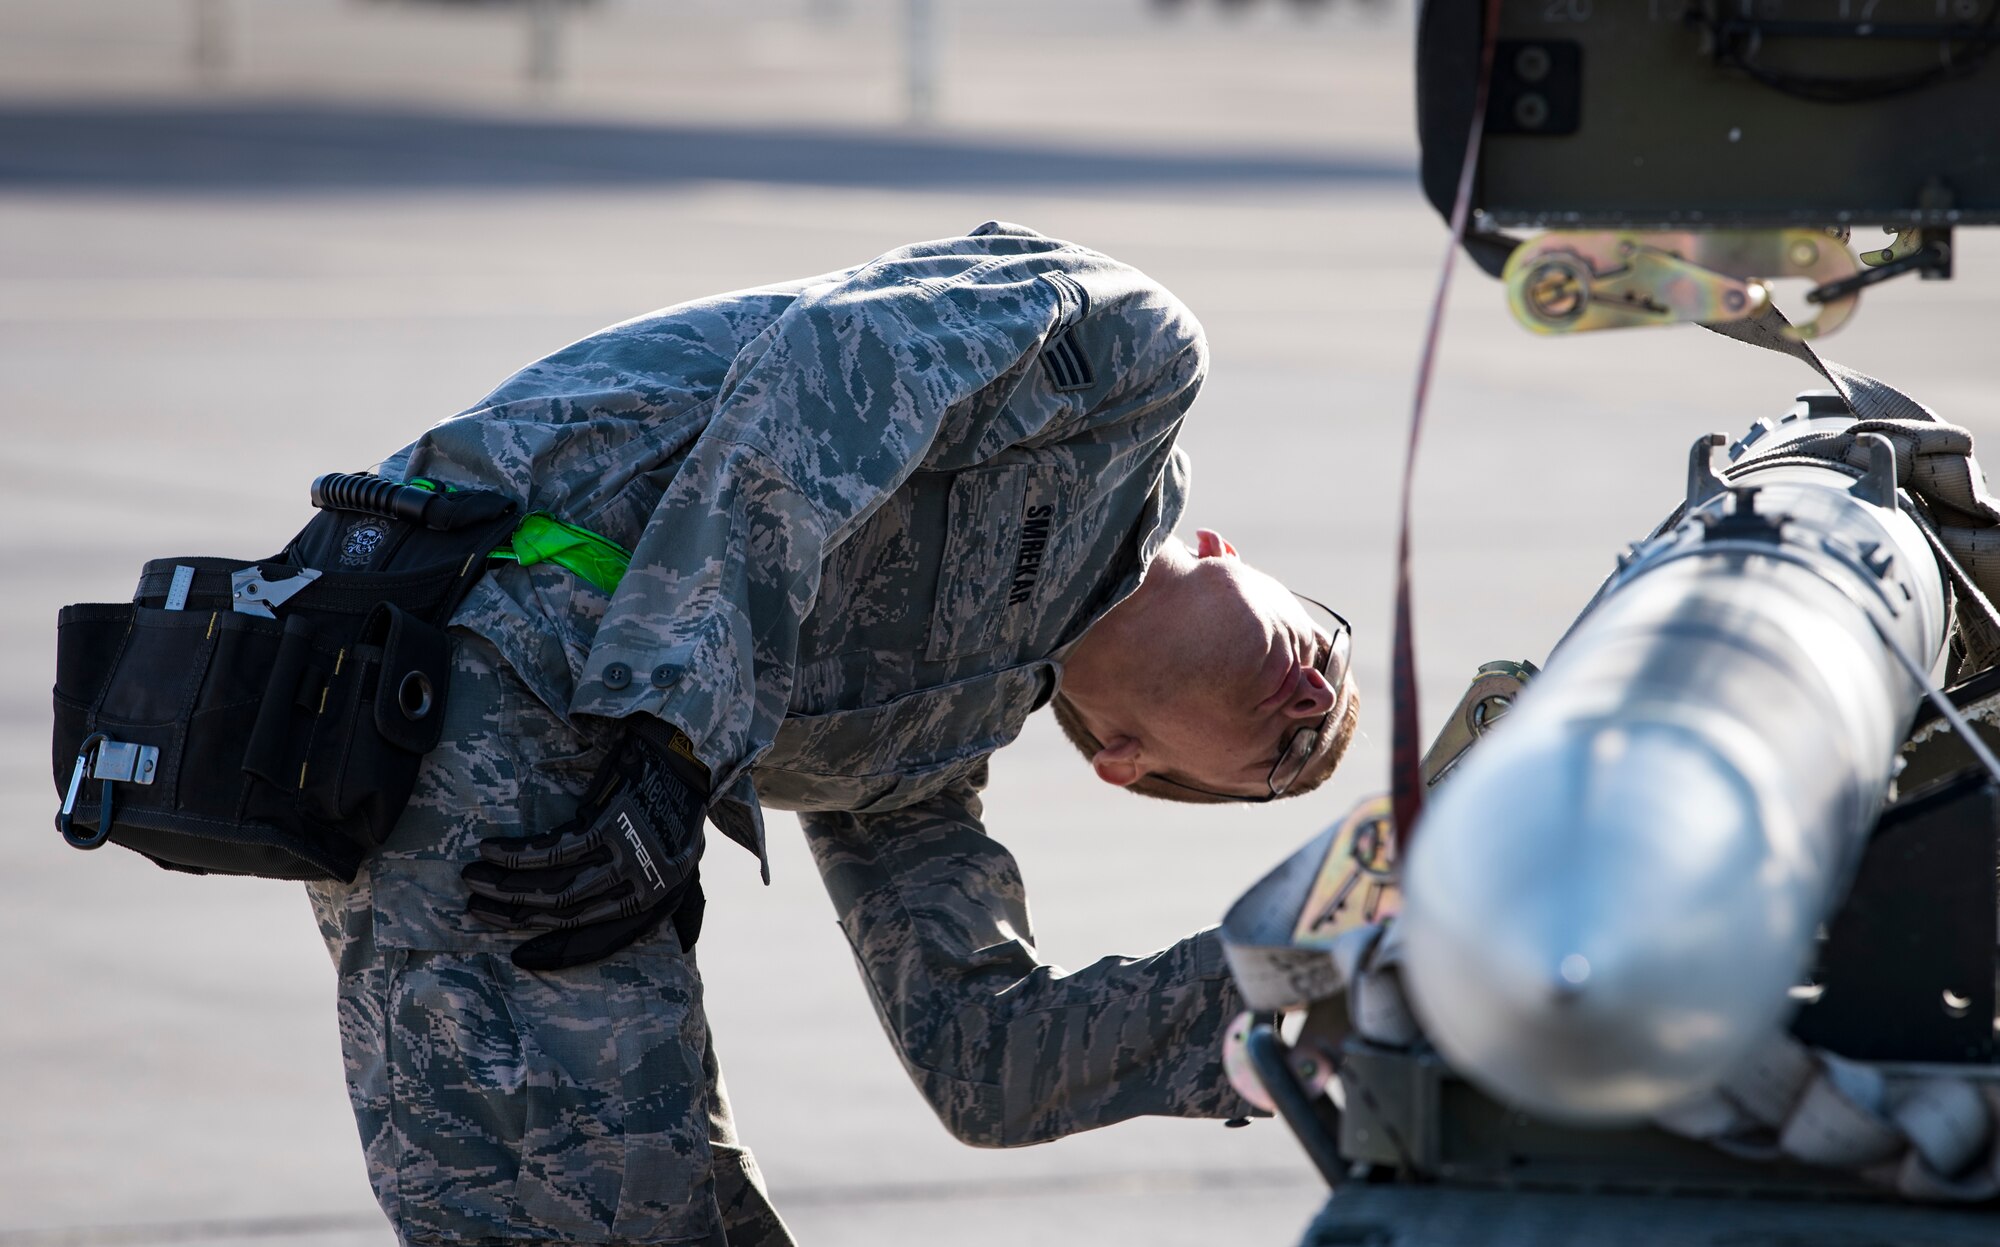 Senior Airman Travis Smrekar, 57th Aircraft Maintenance Squadron weapons loader, prepares a missile to be loaded during a load crew competition at Nellis Air Force Base, Nevada, April 13, 2018. The crews inspected, loaded, and secured two Mark 84 bombs and one AIM-120 AMRAAM onto their respective aircraft.(U.S. Air Force photo by Airman 1st Class Andrew D. Sarver)